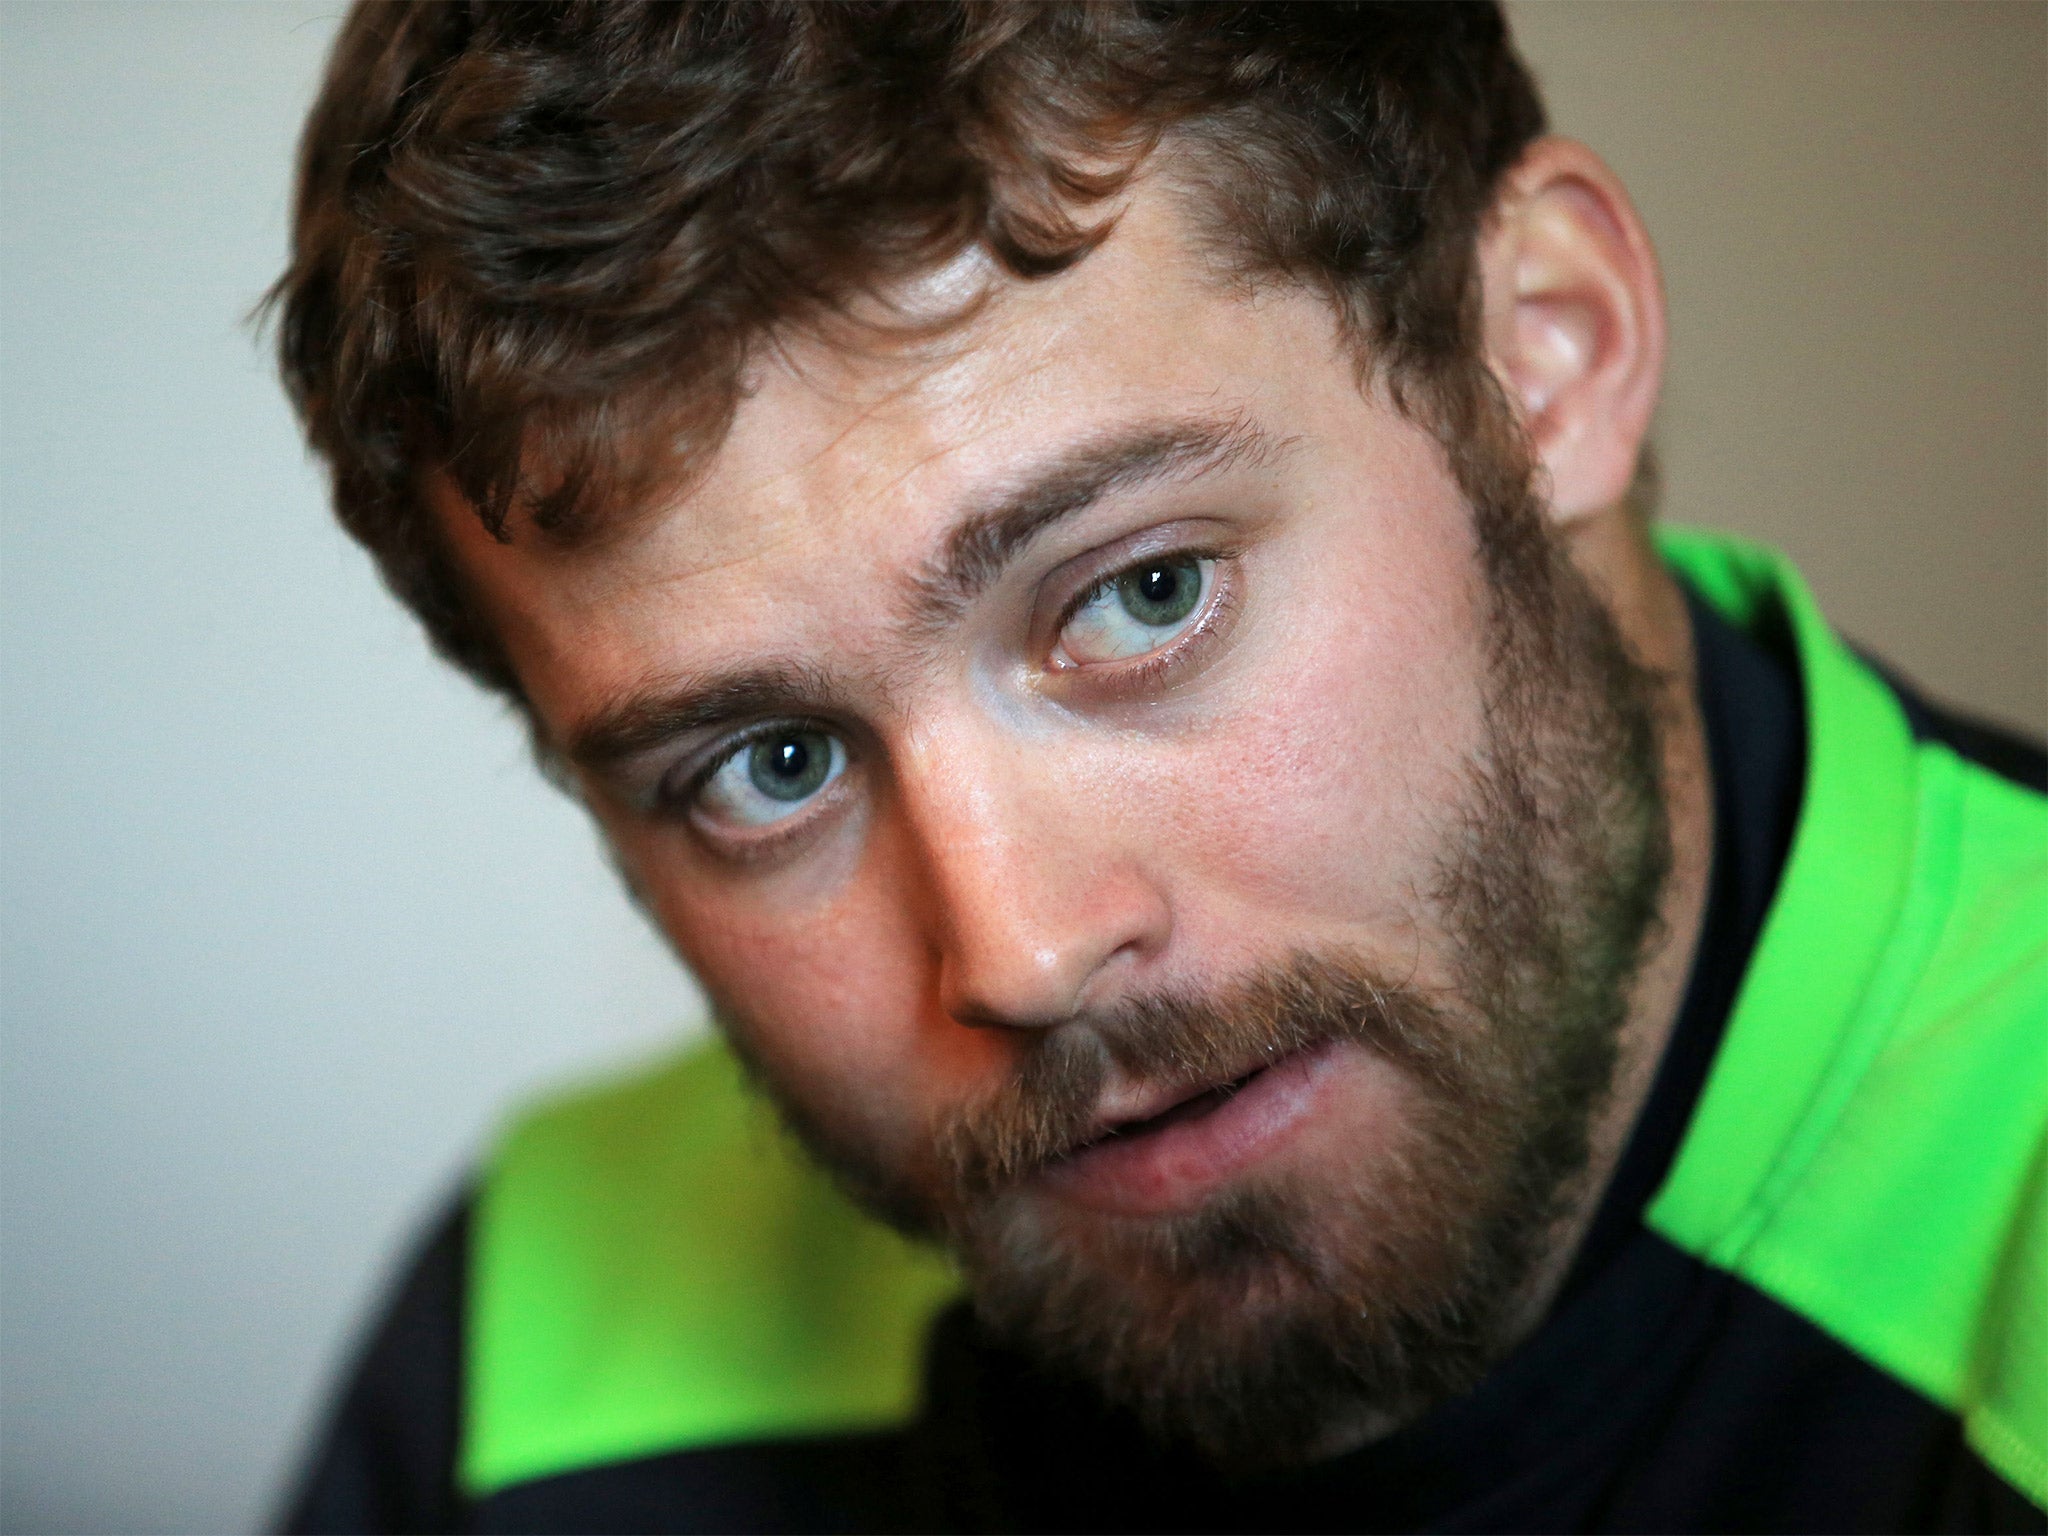 The stadium noise was so loud it was hard to hear the calls, says Leigh Halfpenny of Wales’ last home Six Nations match against England